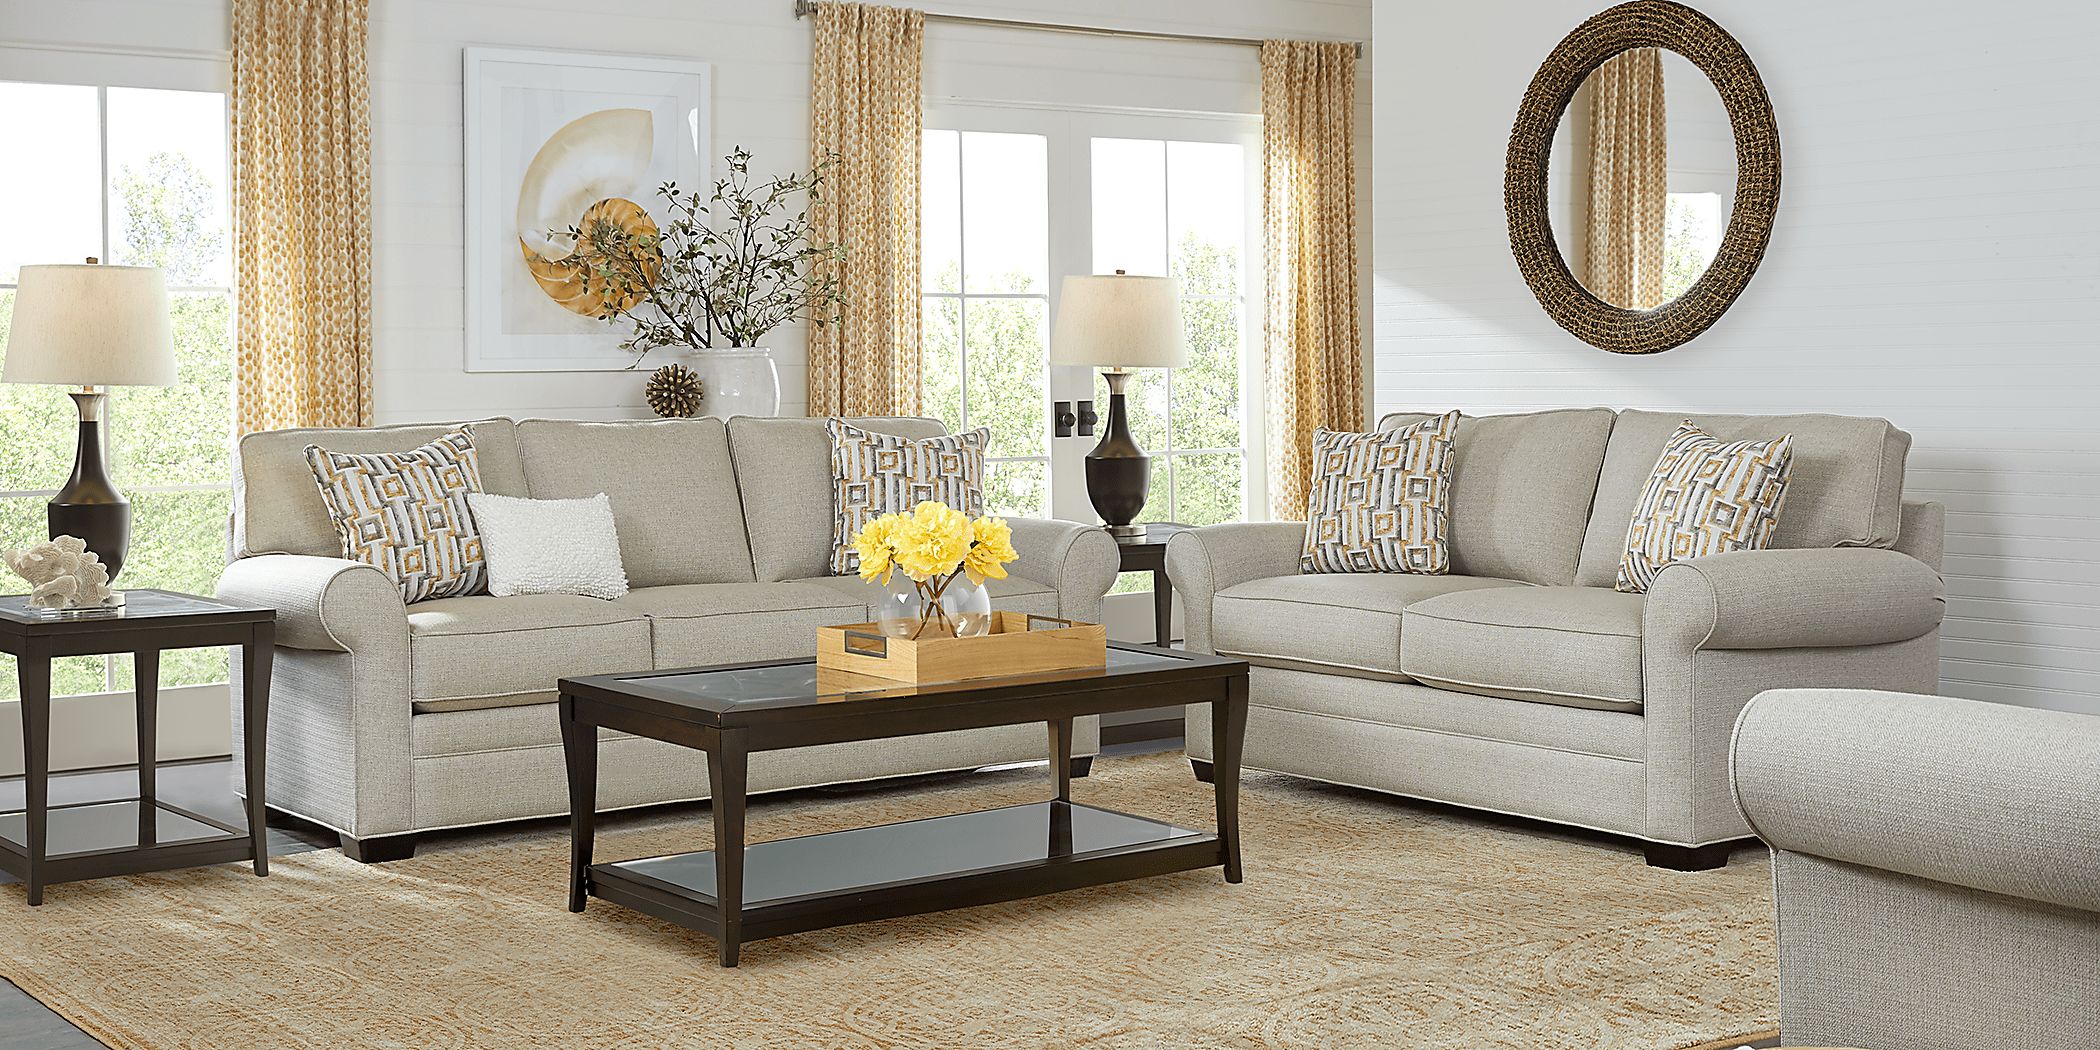 Cindy Crawford Home Bellingham Sand Textured 7 Pc Living Room